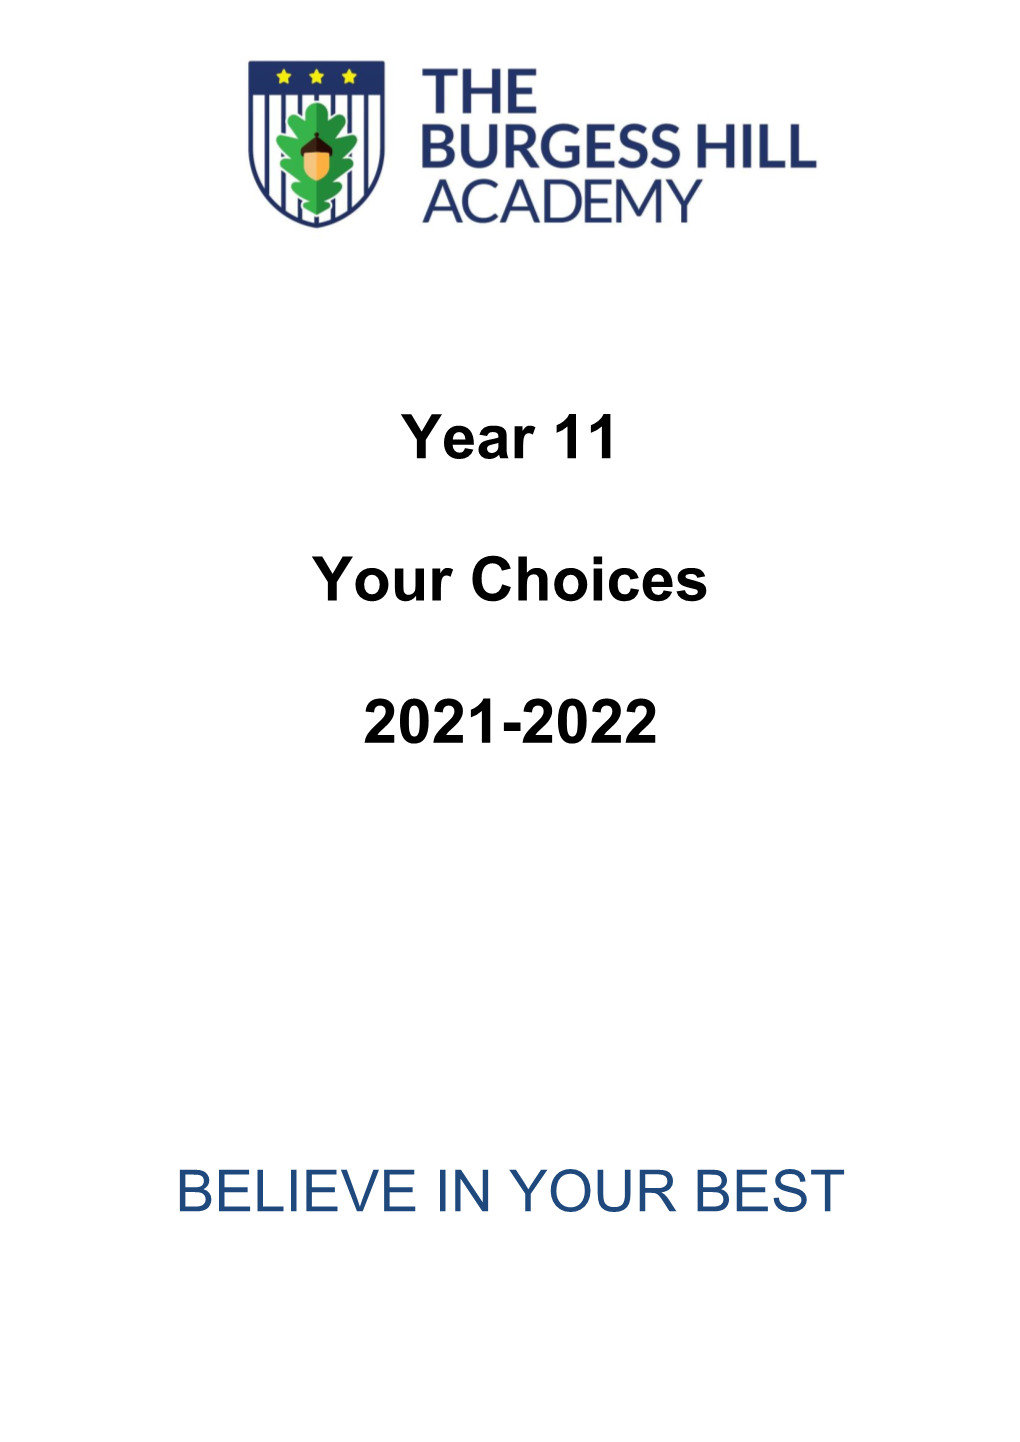 Year 11 Your Choices 2020-2021